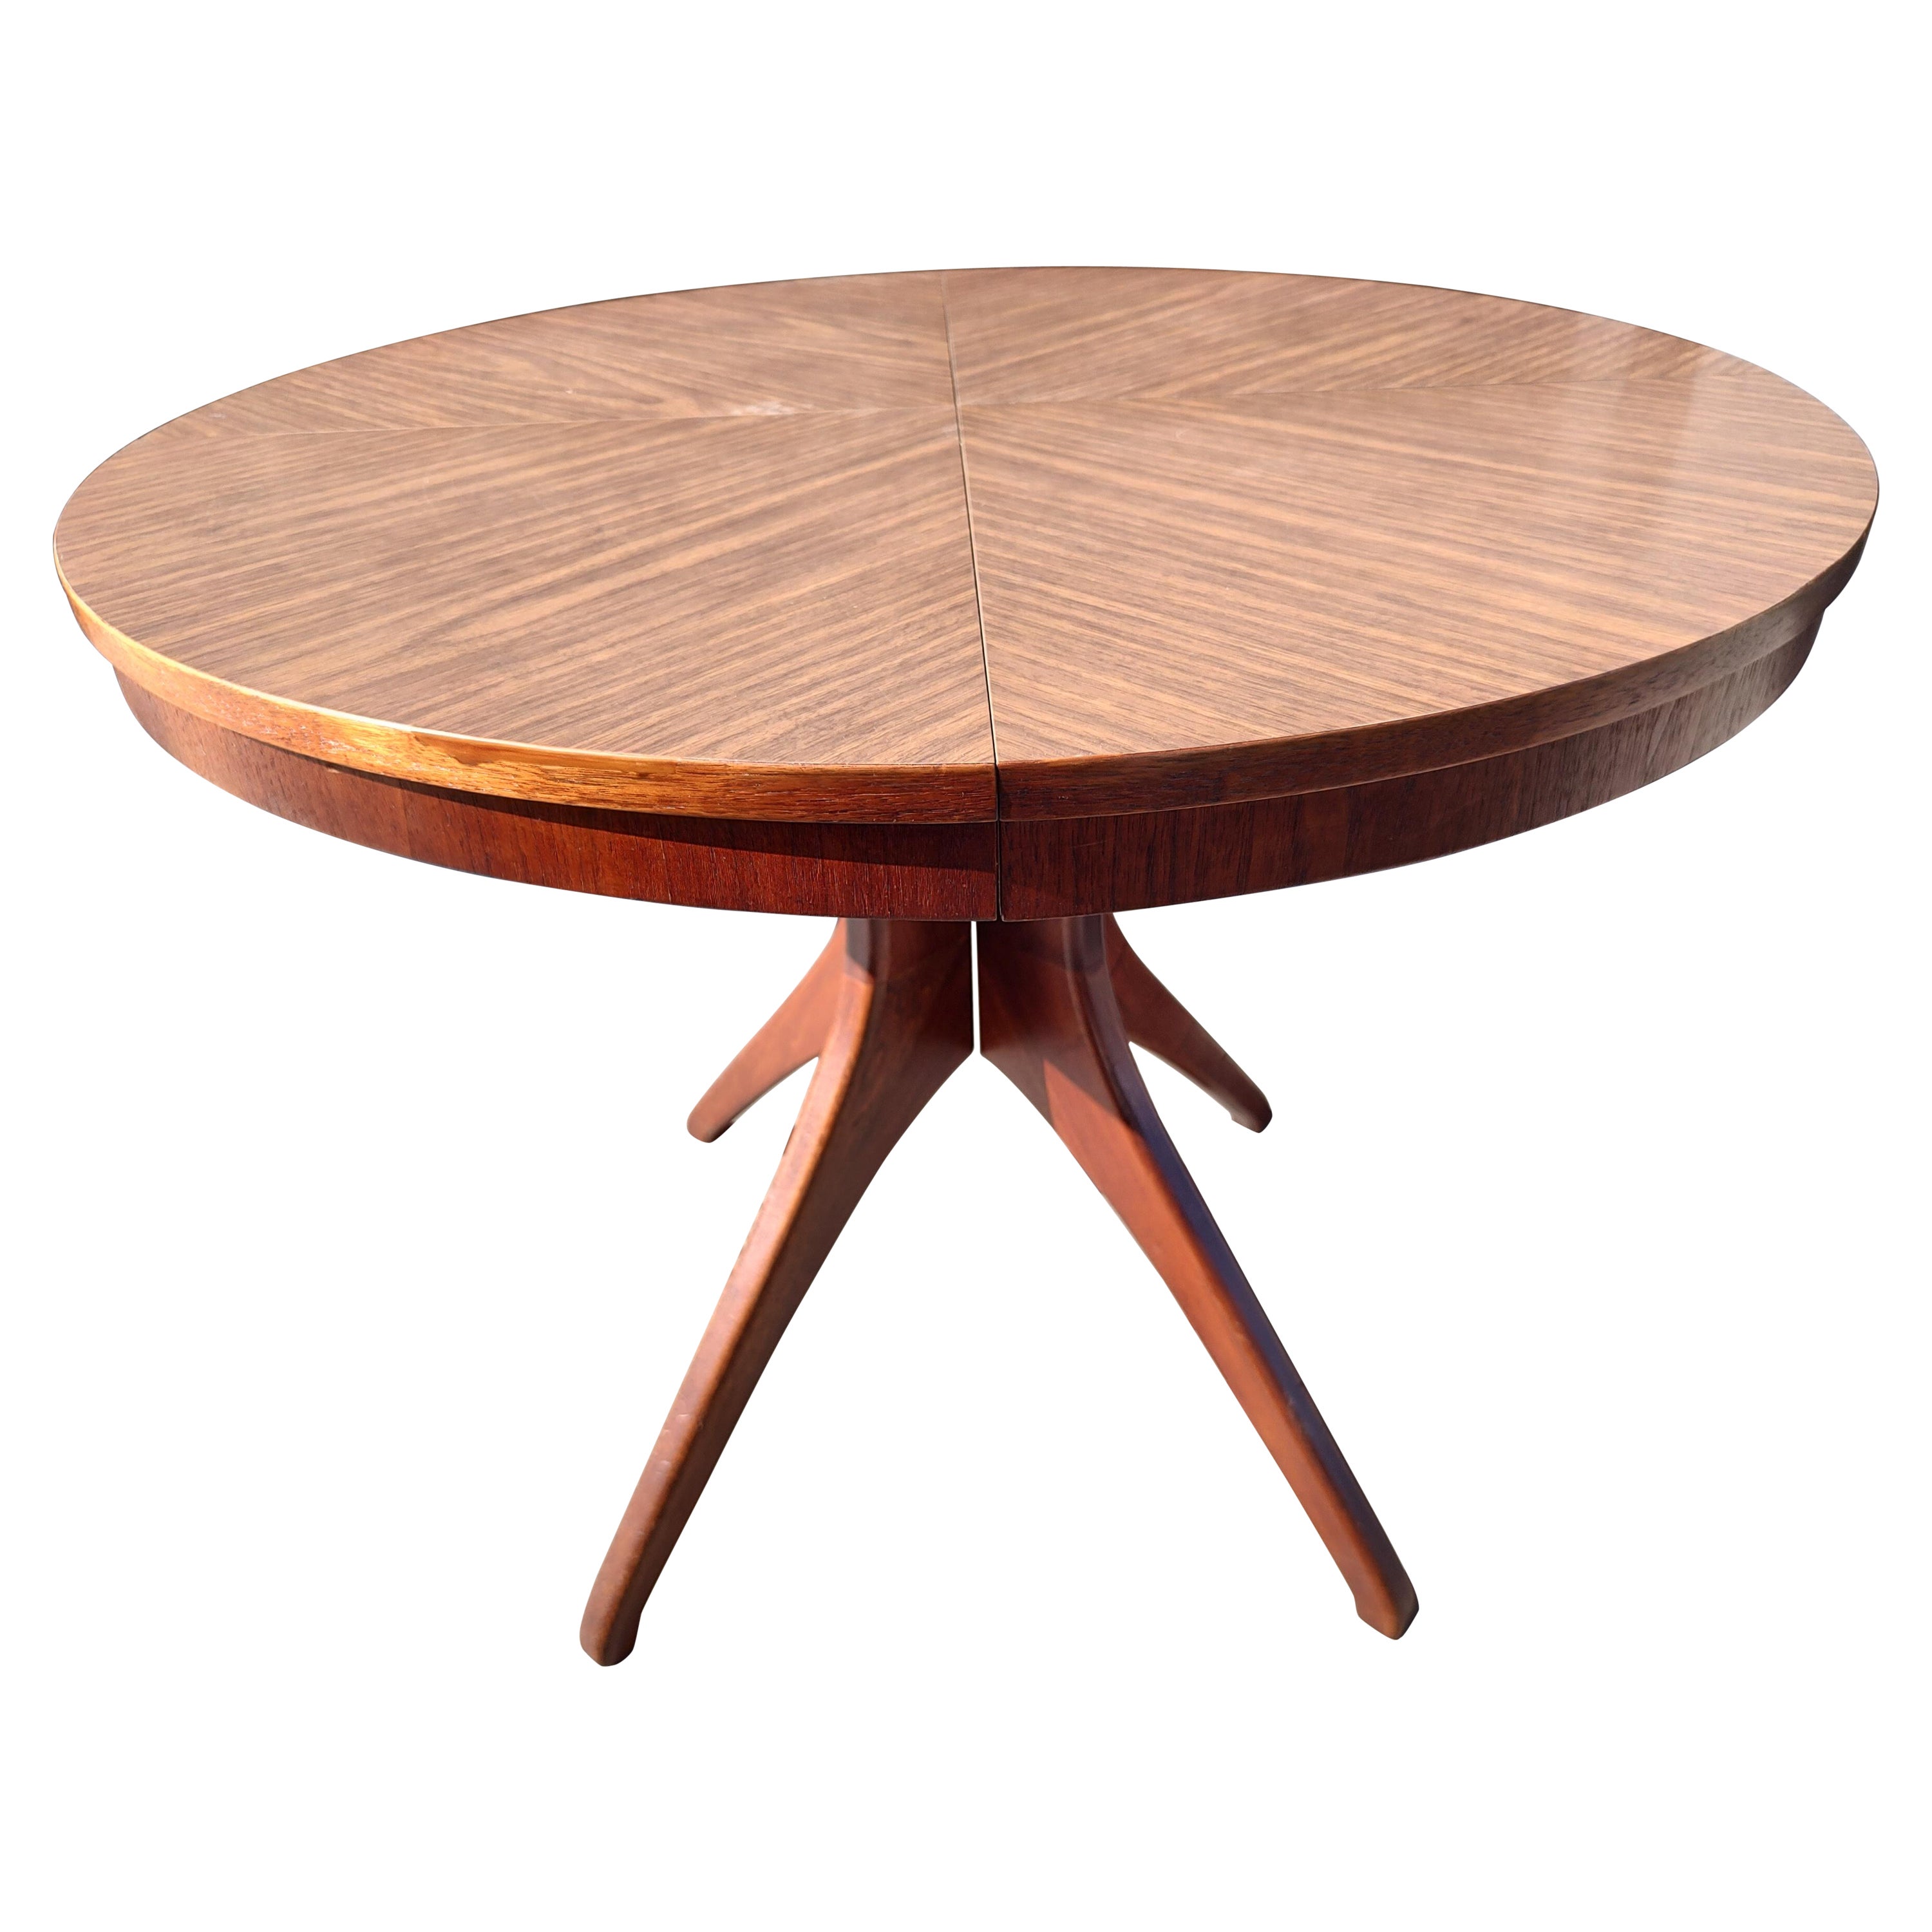 Hand-Crafted Mid-Century Modern Sculptural Walnut & Laminate Dining Table by Adrian Pearsall For Sale